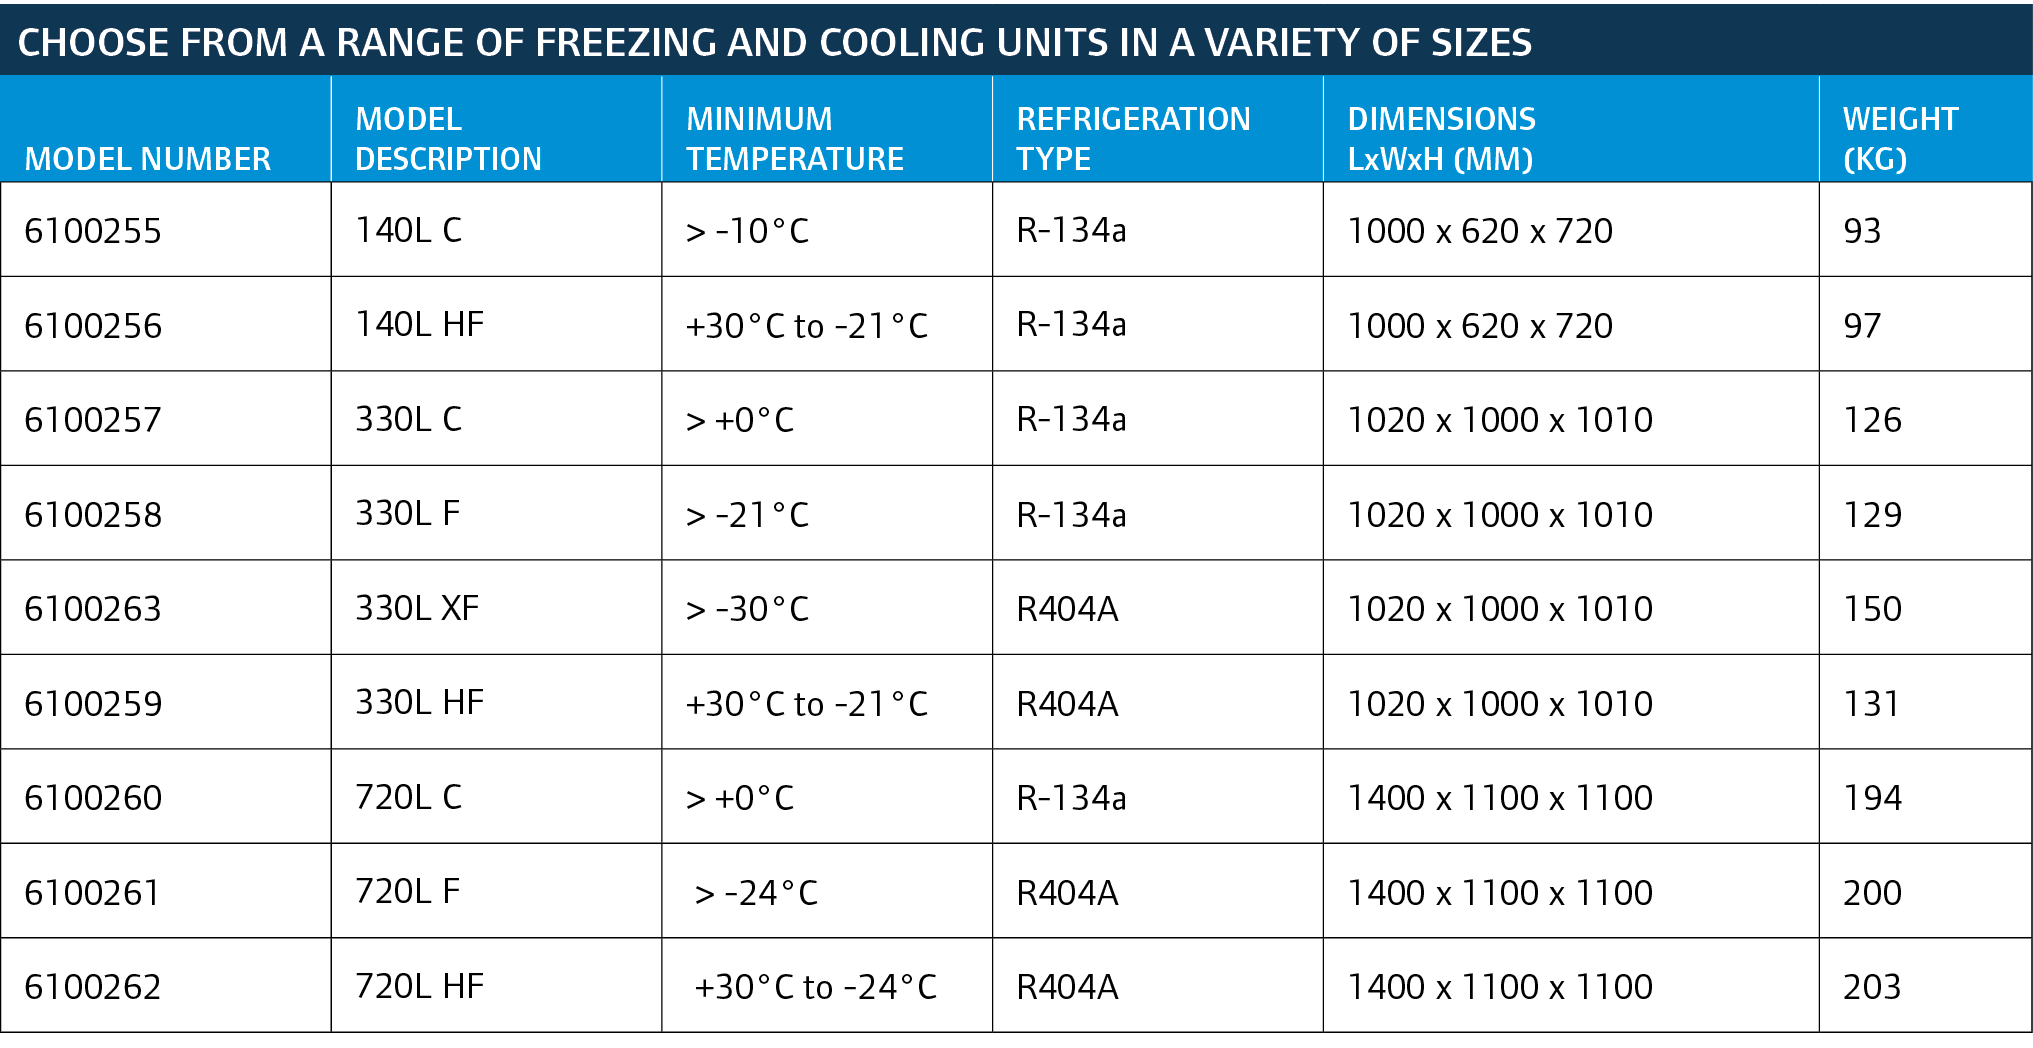 Choose from a range of Freezing and Cooling units in a variety of sizes,Model Number,MODEL DESCRIPTION,minimum temper...